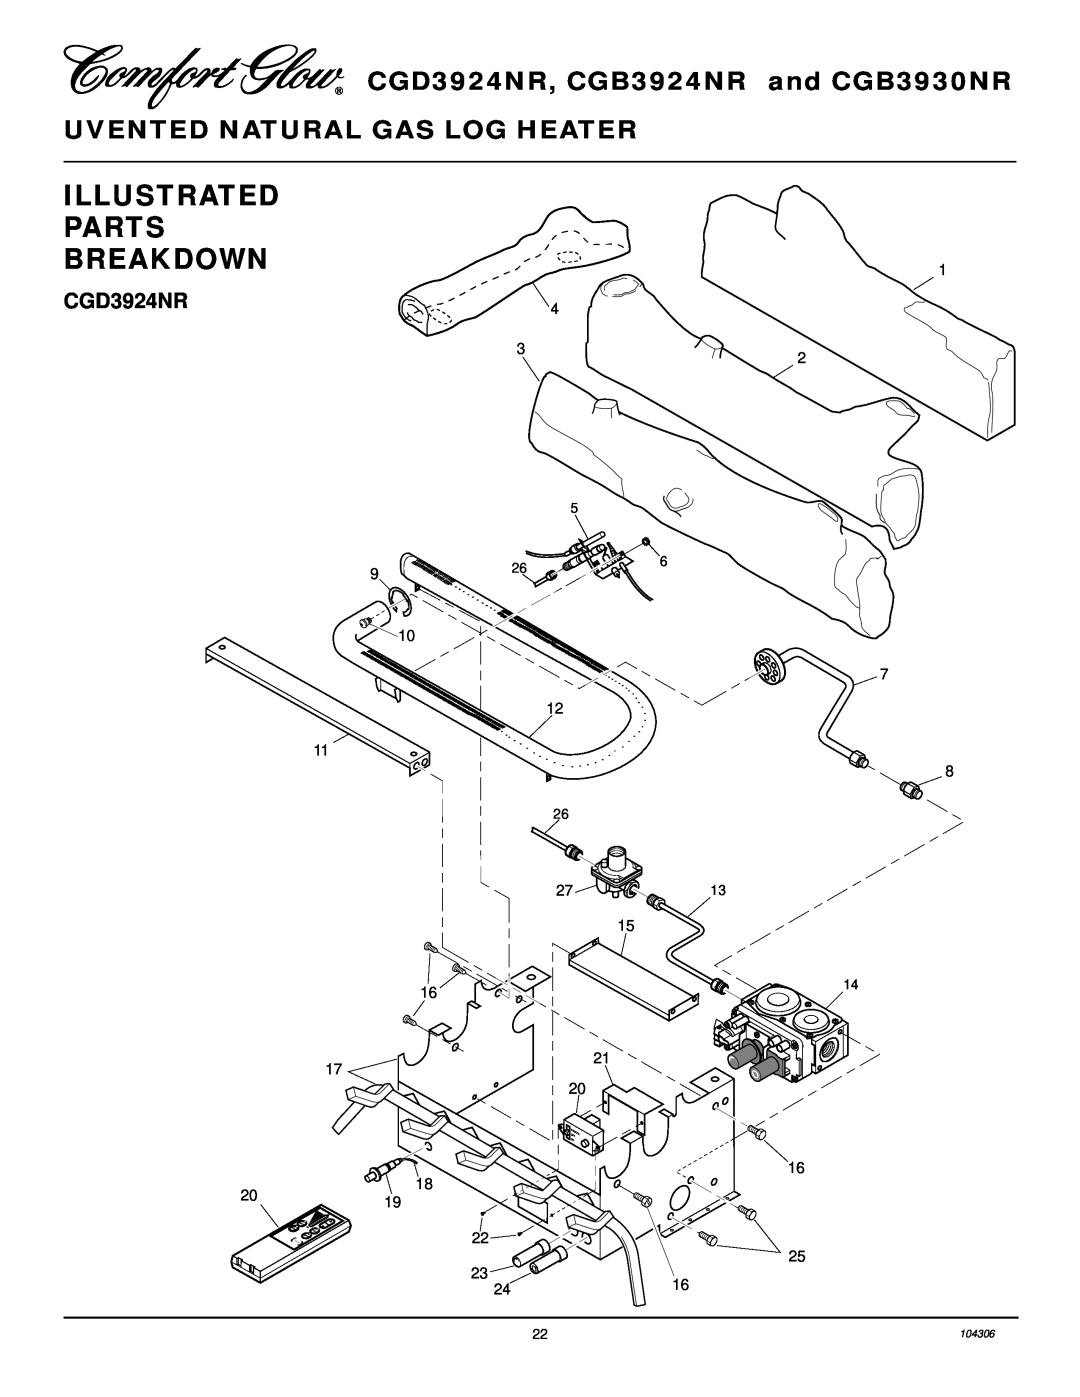 Desa Illustrated Parts Breakdown, CGD3924NR, CGB3924NR and CGB3930NR, Uvented Natural Gas Log Heater, 104306 